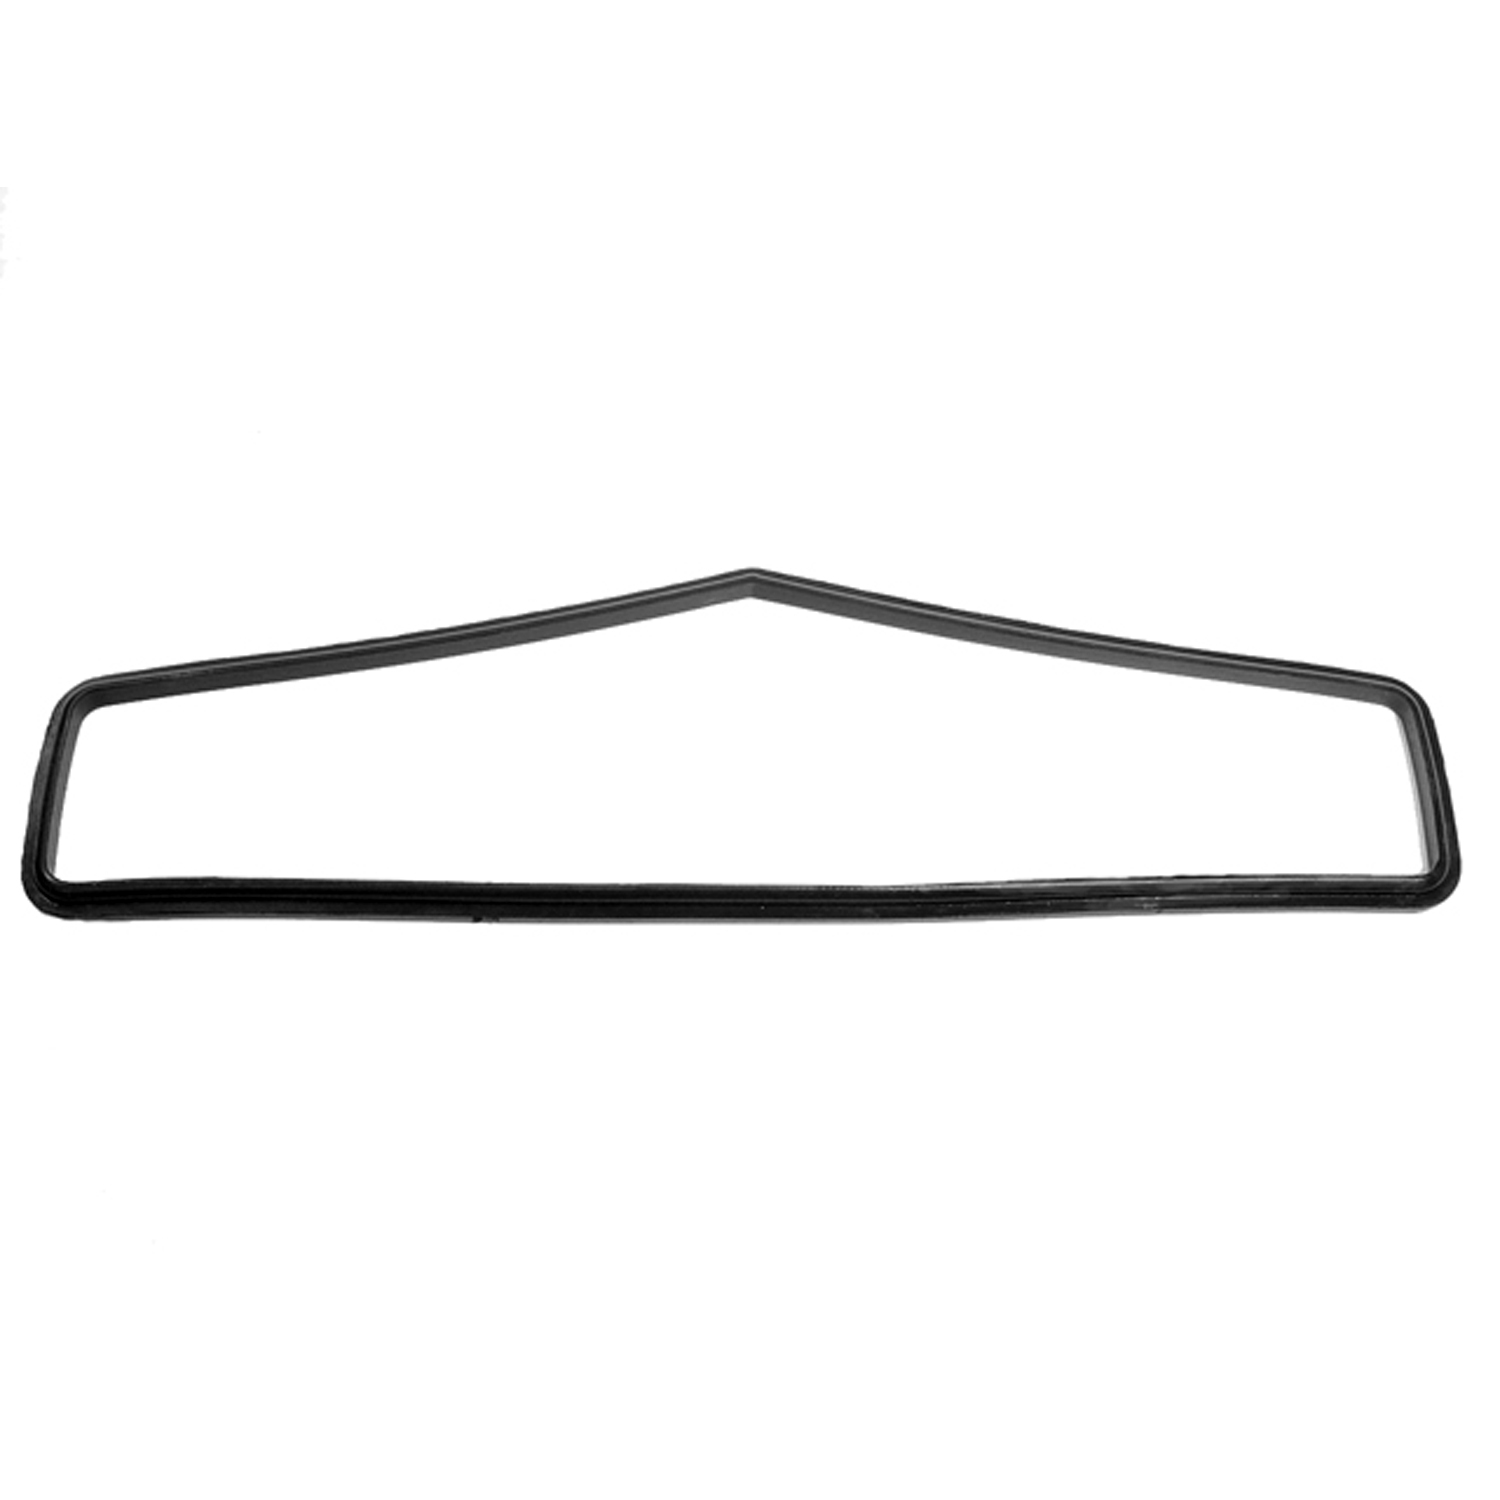 1955 Chevrolet Truck Cowl Vent Seal.  NOT for models with flat-faced cowls-RP 100-N